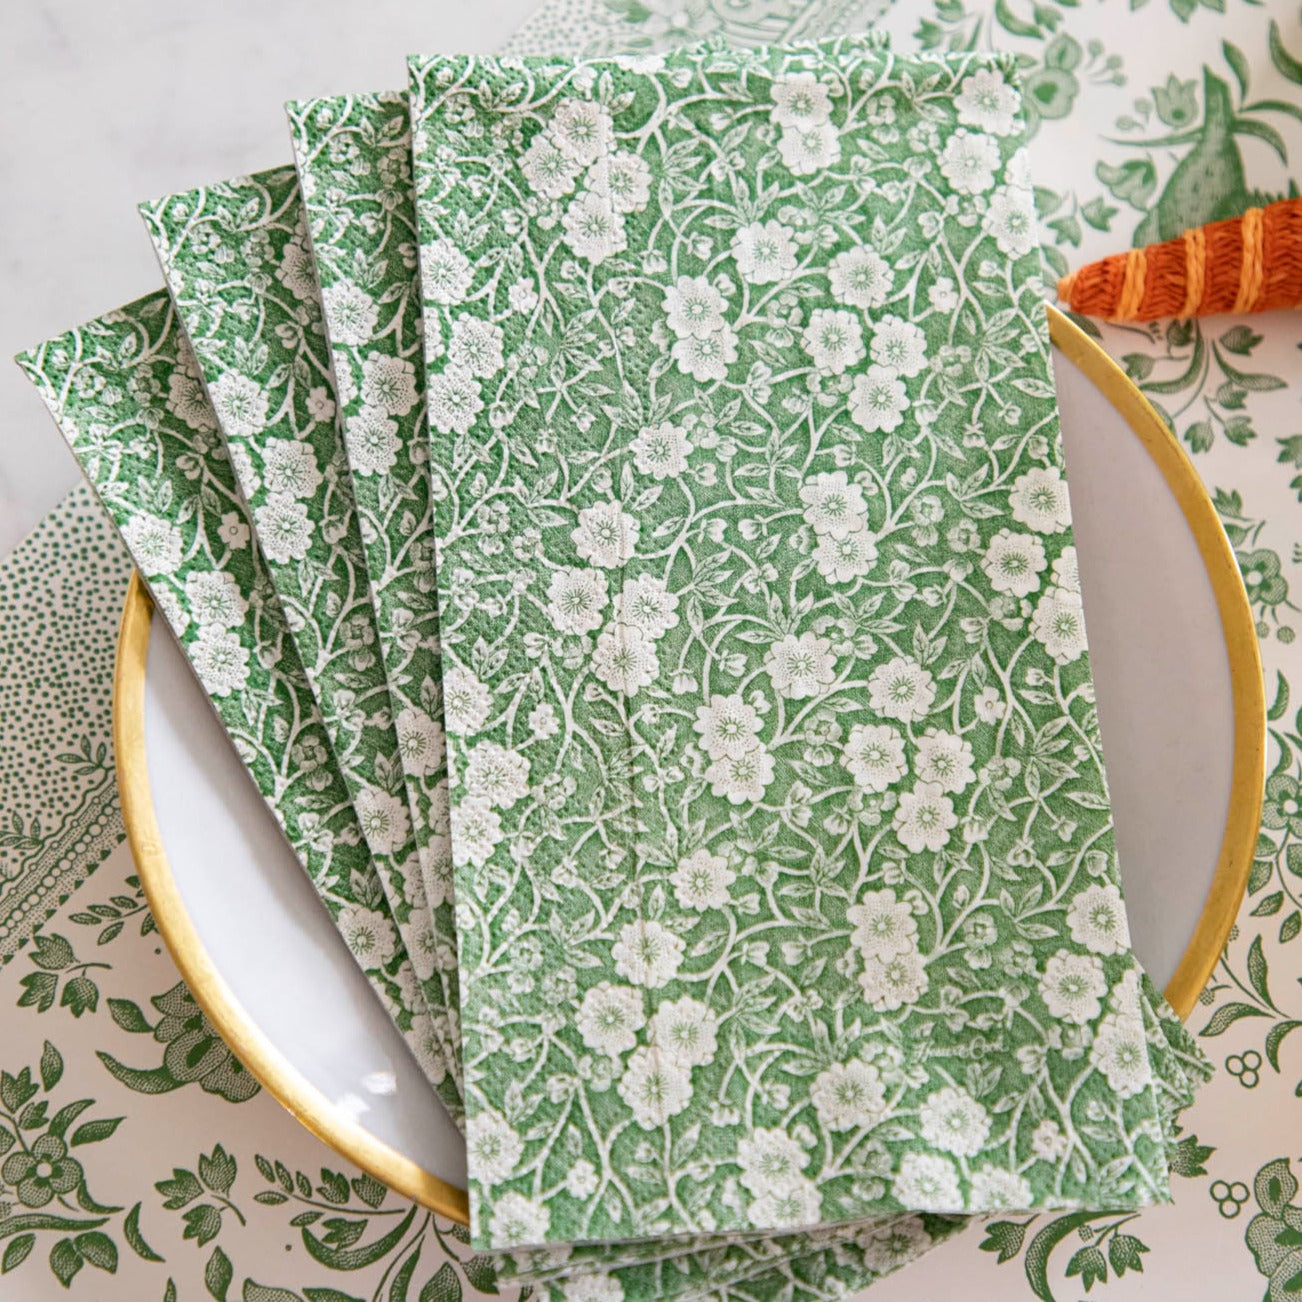 Green Calico Napkins - set of 4. Ideal for table setting. (Hester &amp; Cook)